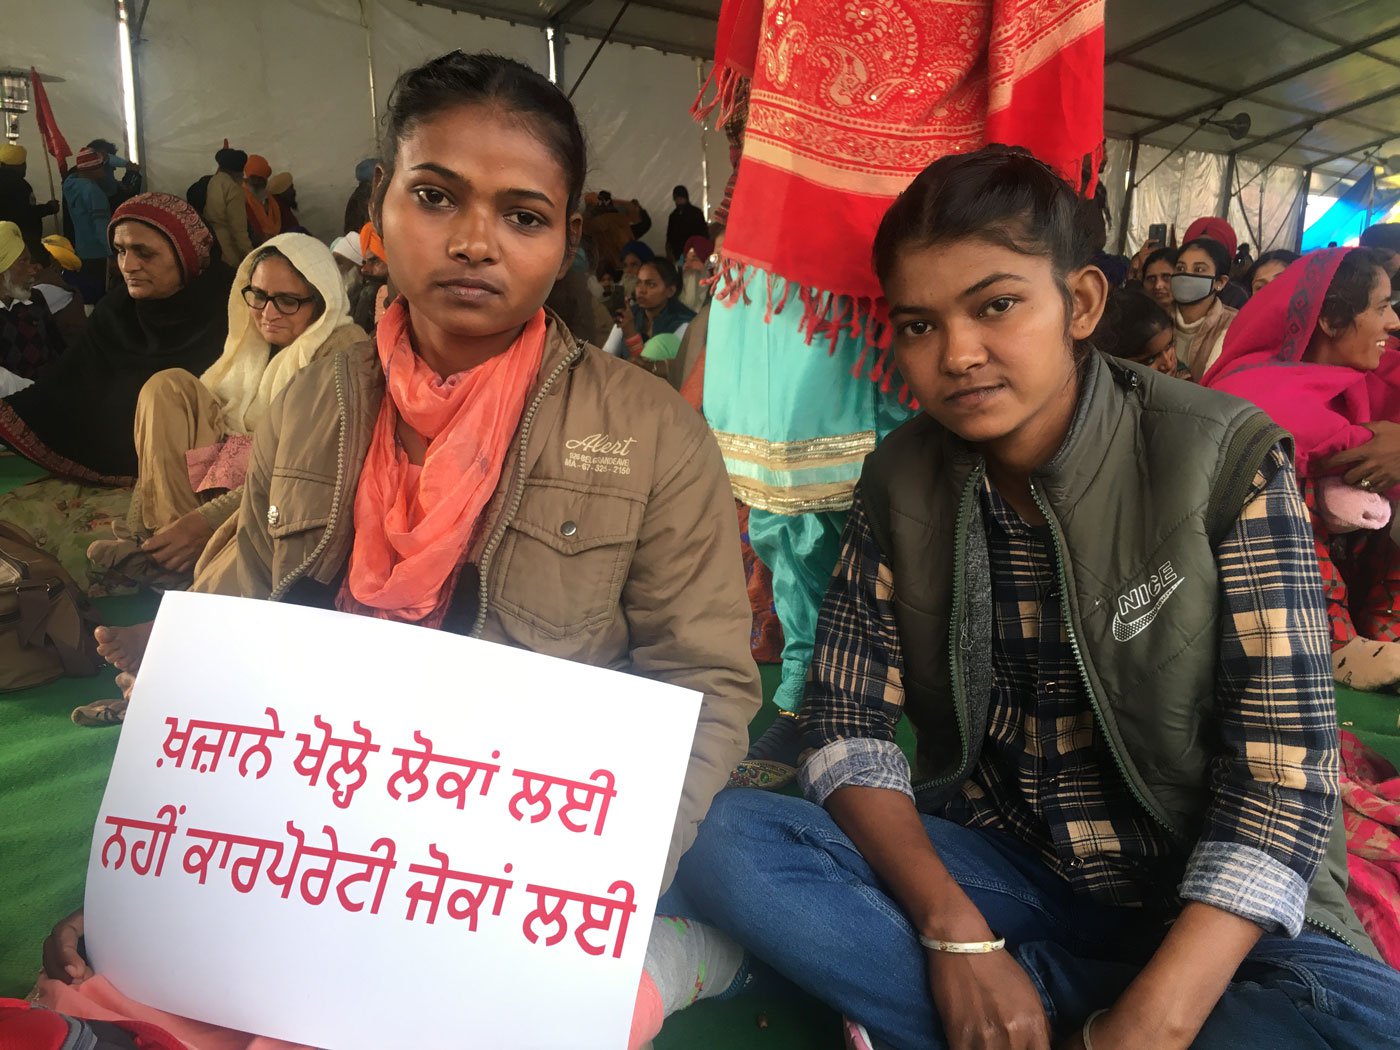 Resham (left) and Beant: 'If farmers' land is taken away by these laws, will our parents find work and educate their children?'